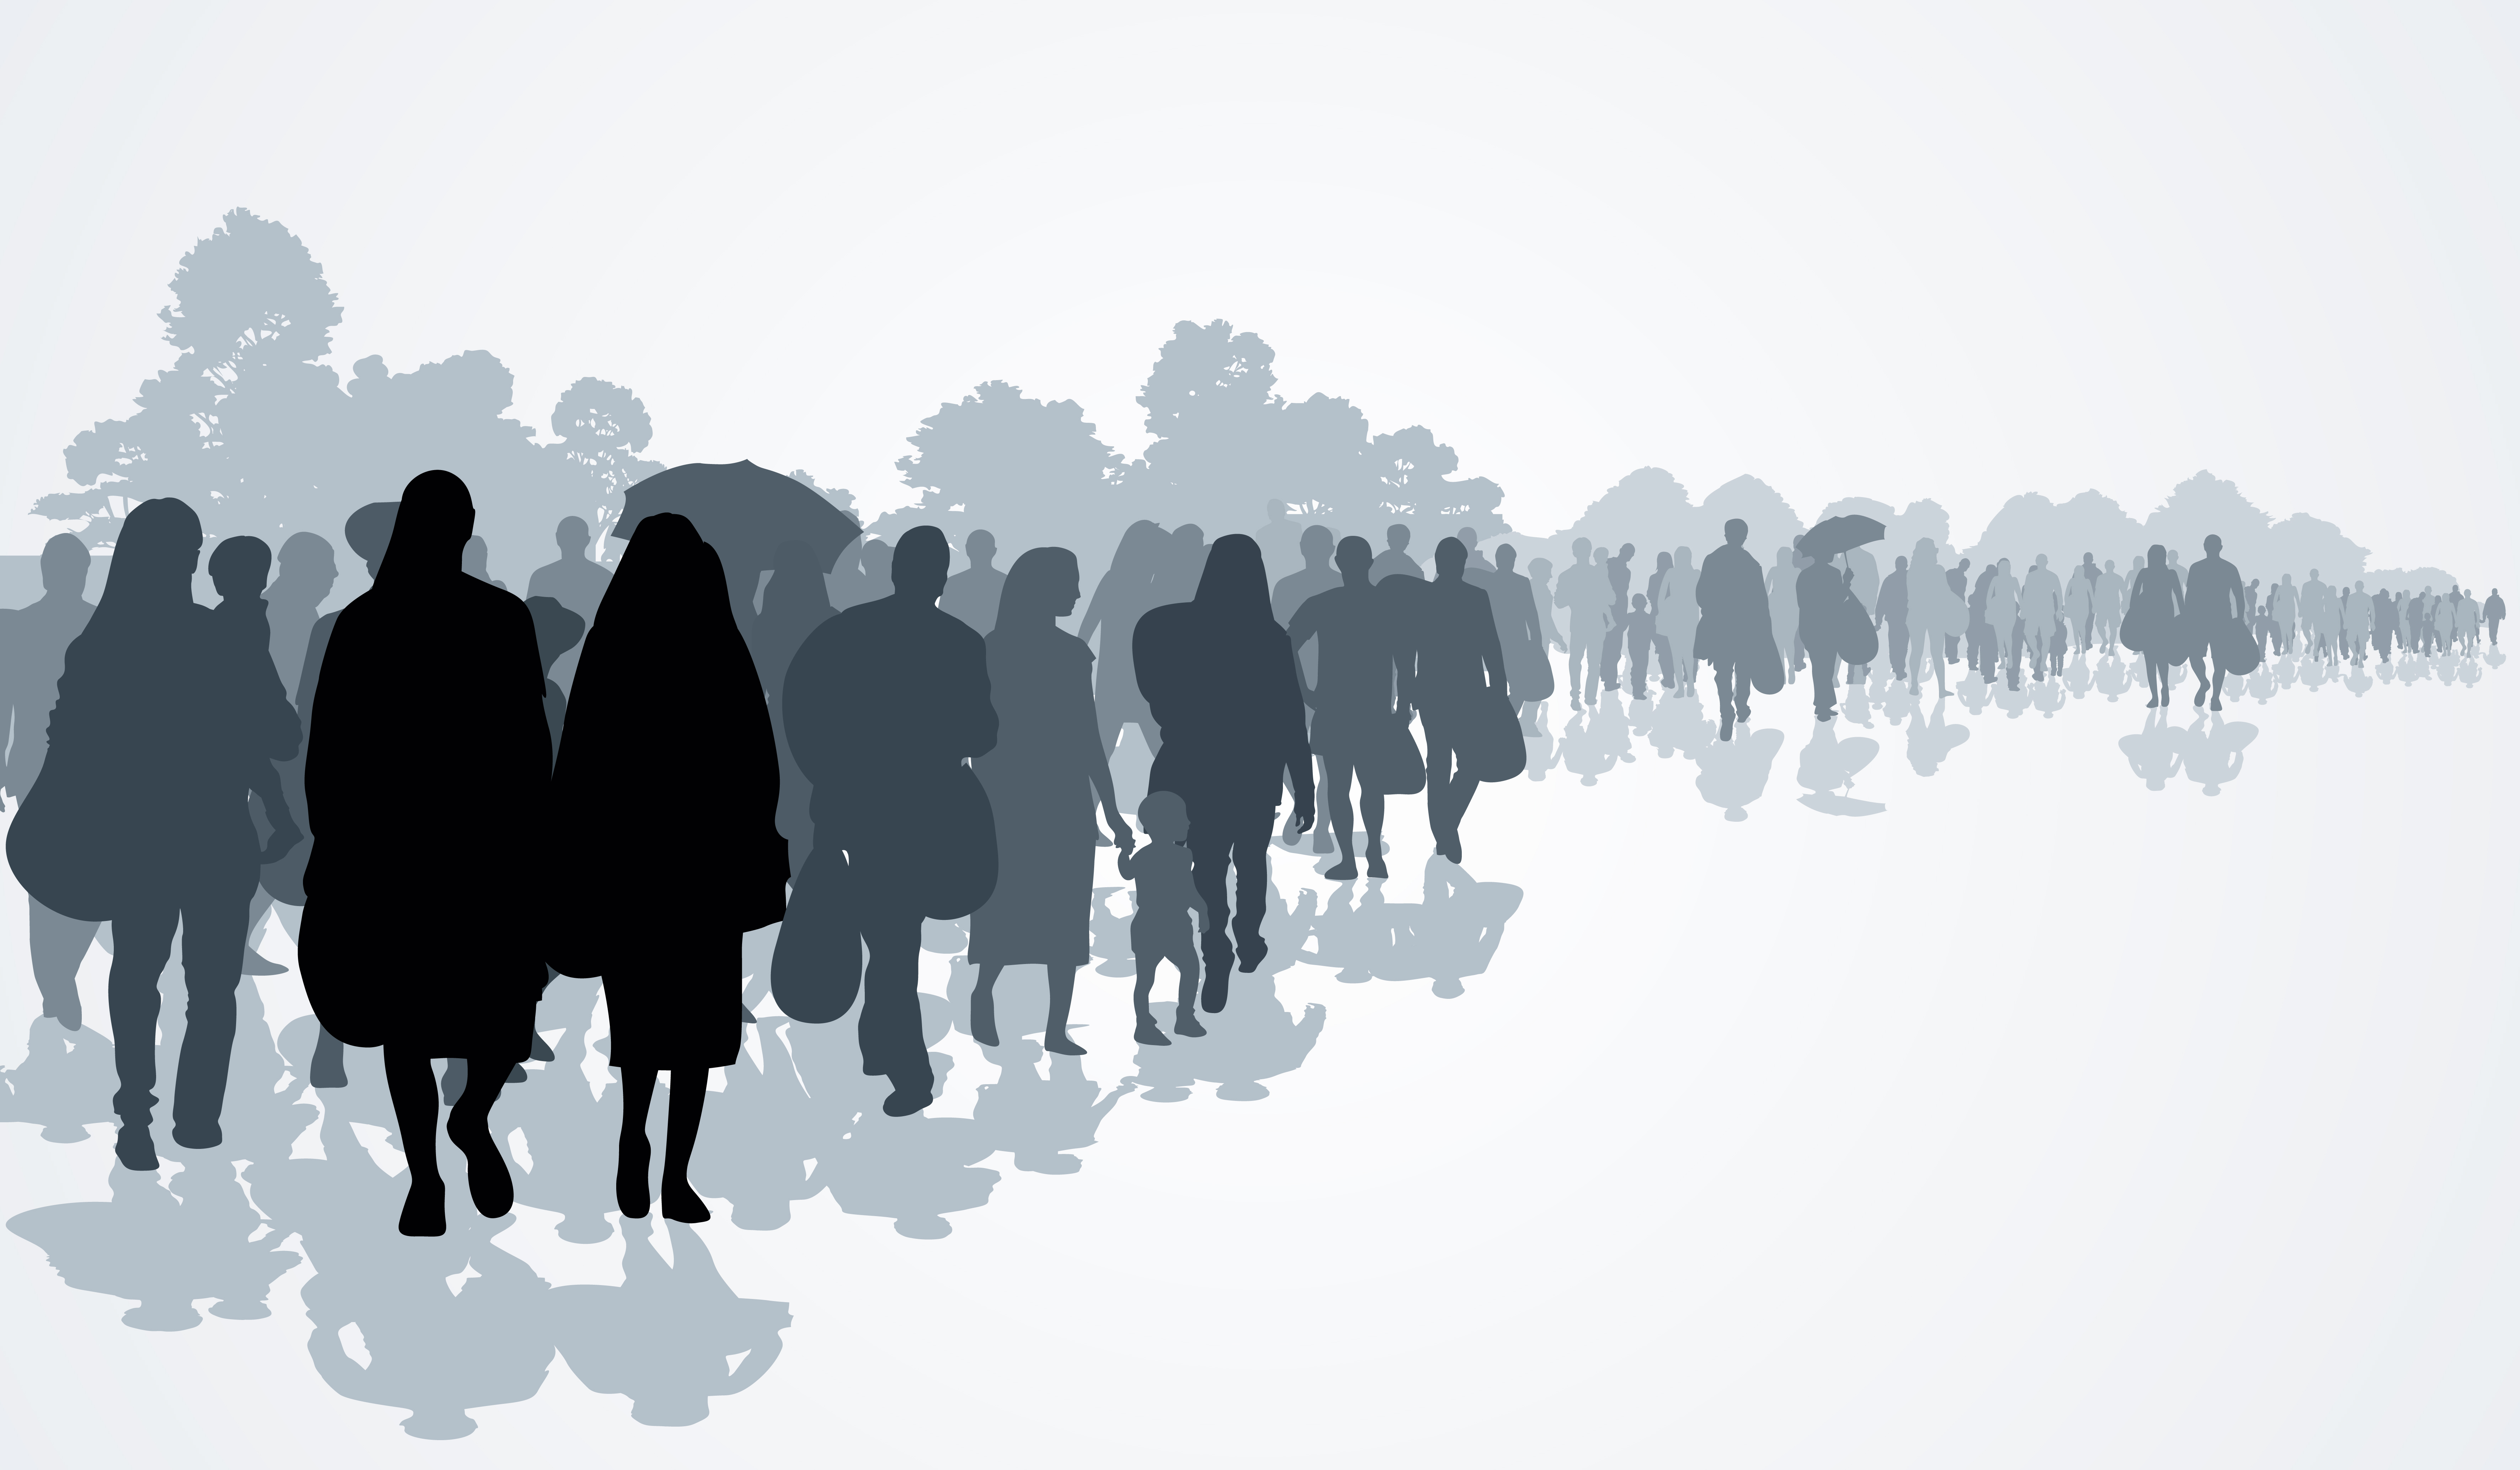 Image of people in a line.